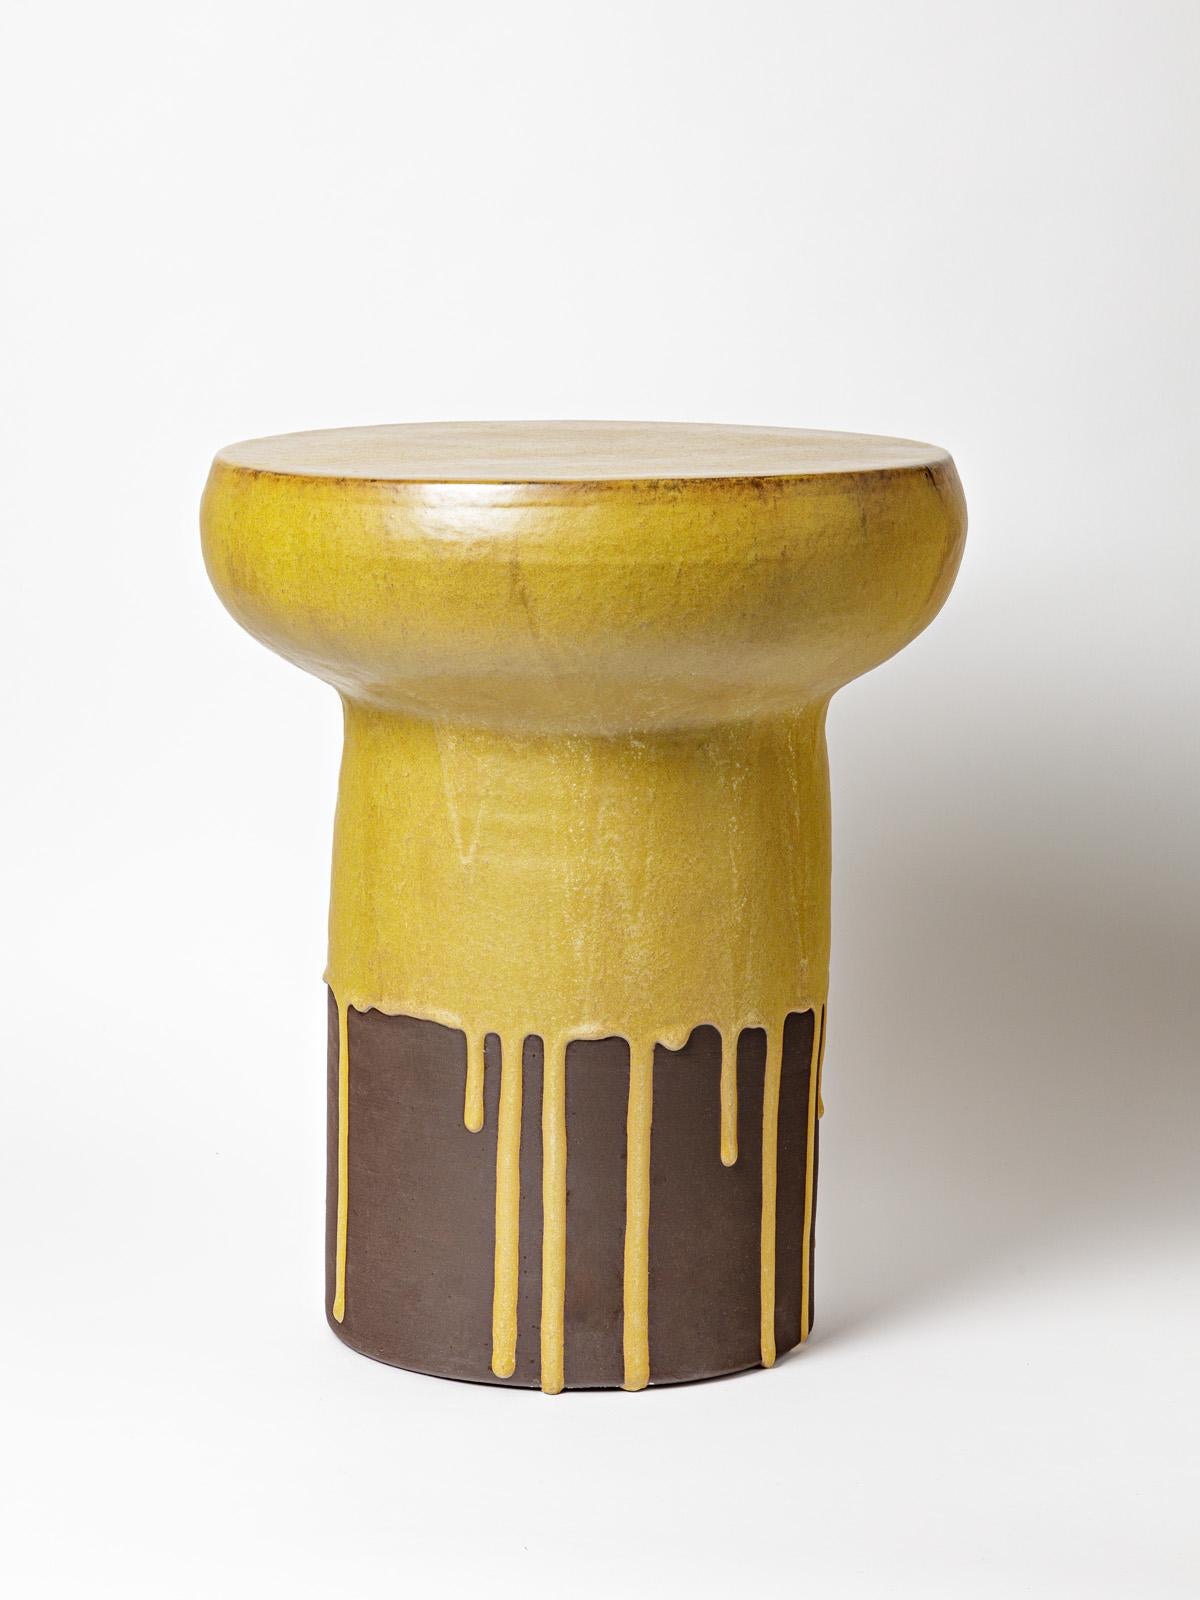 Beaux Arts Ceramic Stool or Table with Glazes Decoration by Mia Jensen, circa 2022